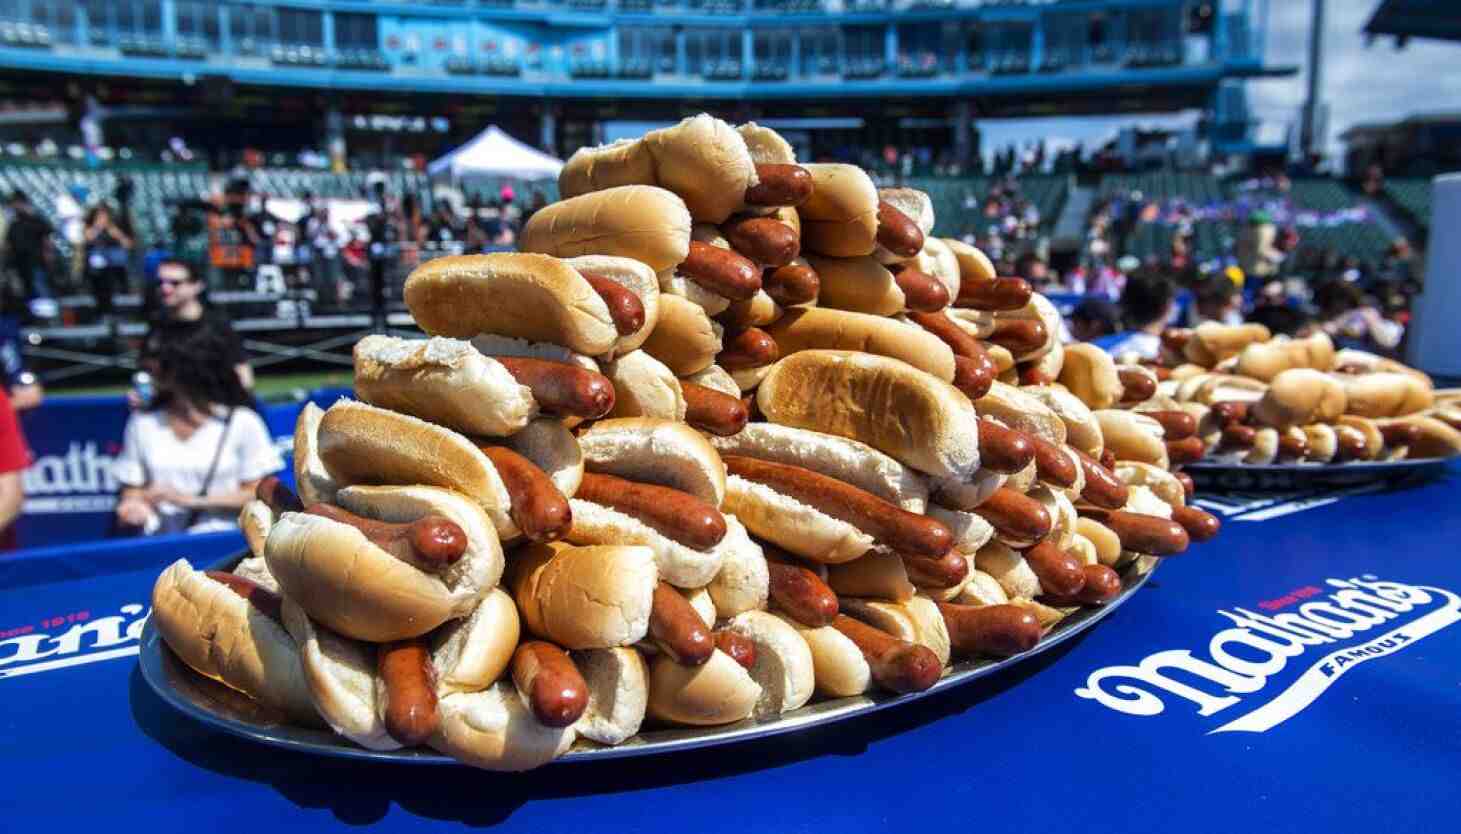 Is it OK to eat hot dogs sometimes?